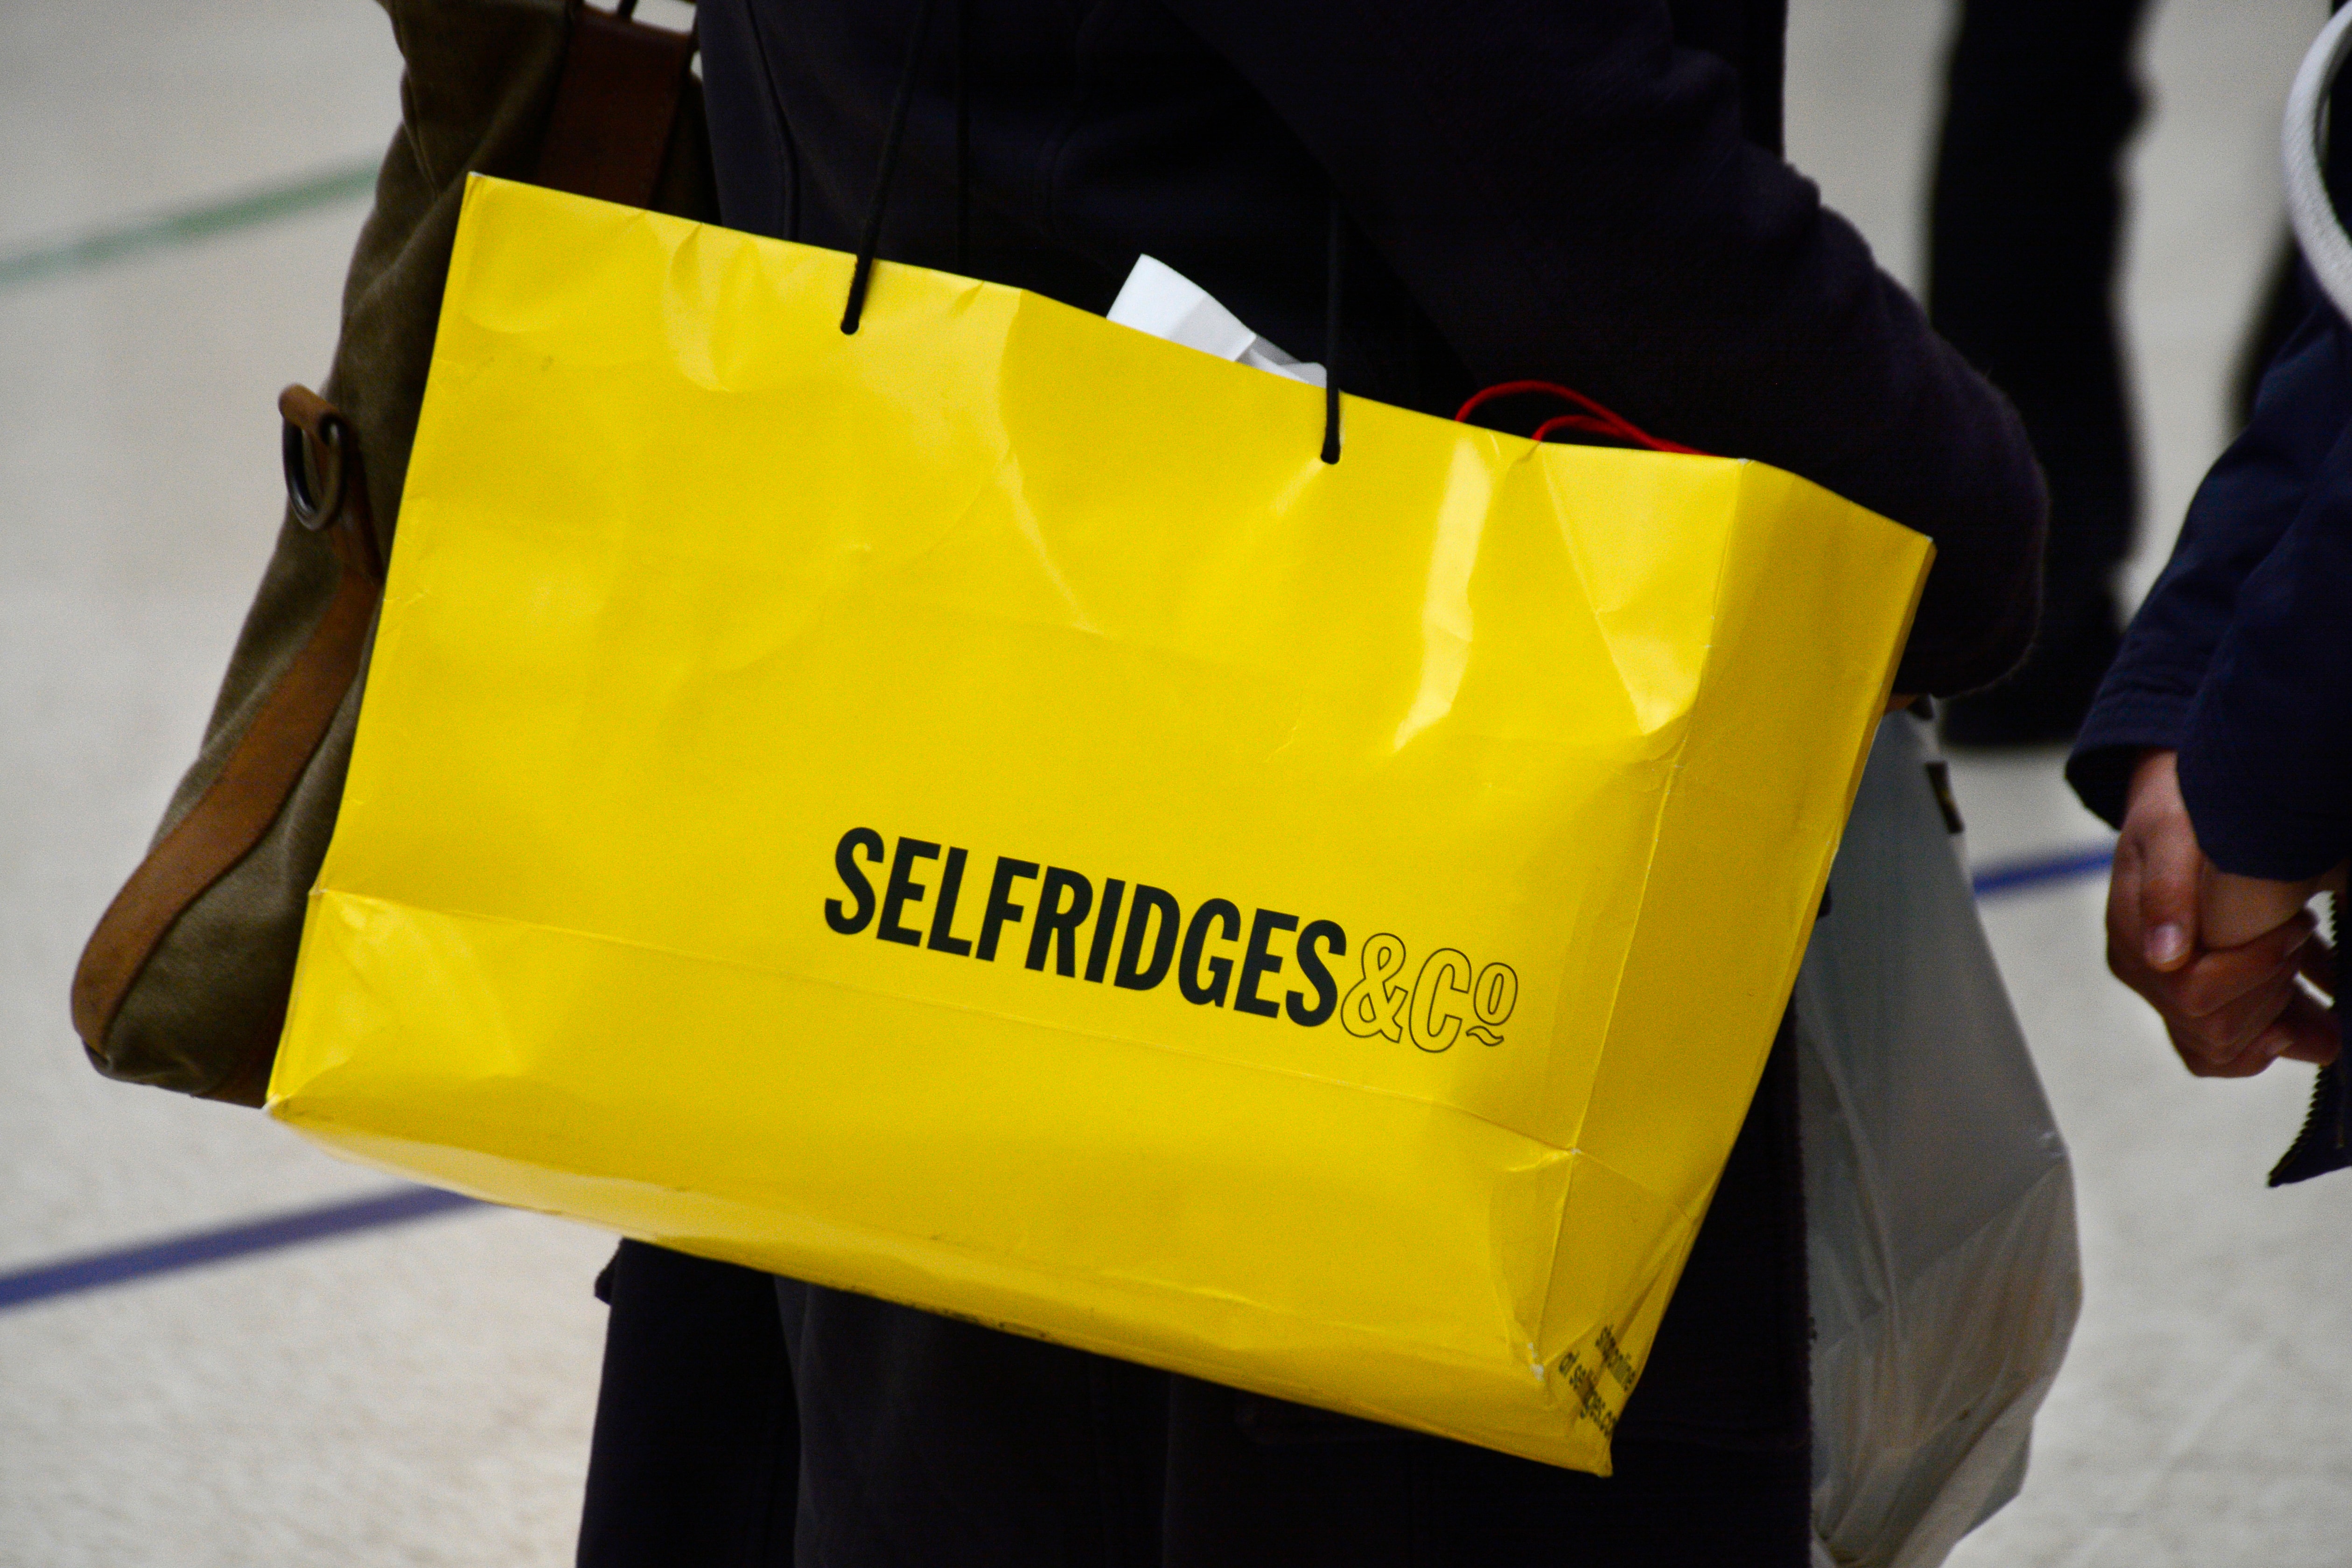 selfridges plastic based cosmetic glitter 2021 brands retailer department store sustainability eco friendly pollution statistics